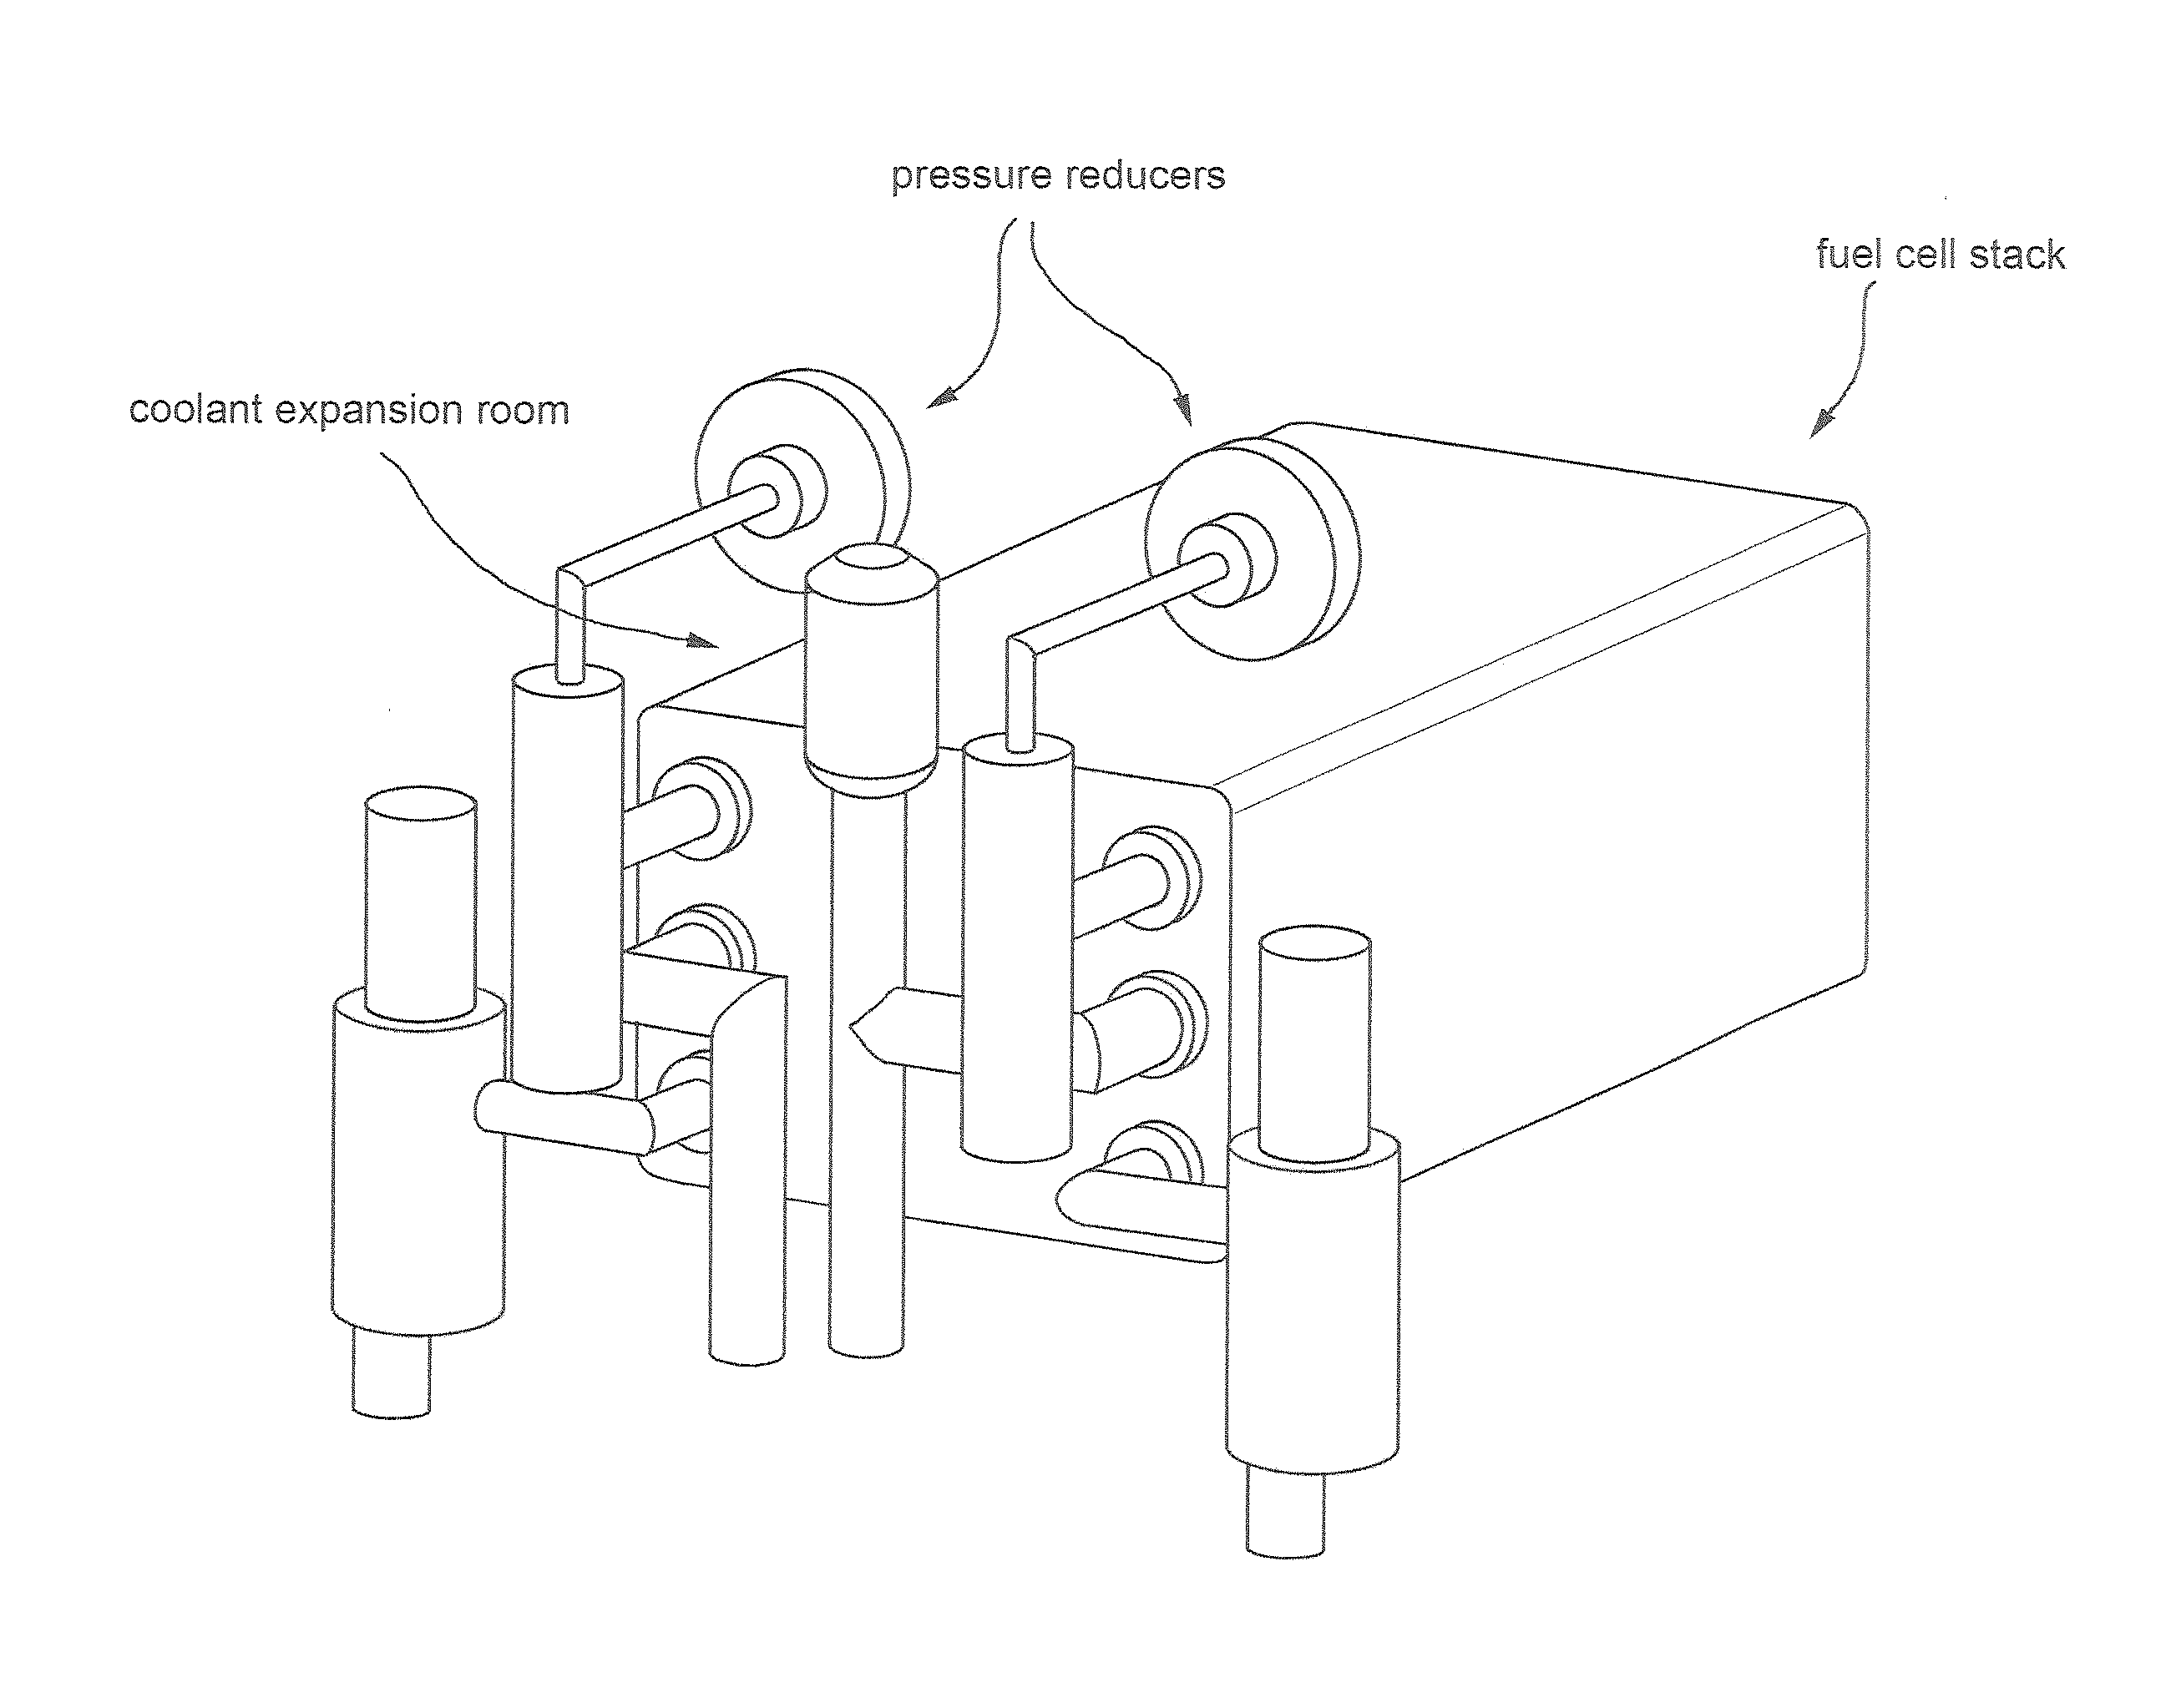 Back-up fuel cell electric generator comprising a compact manifold body, and methods of managing the operation thereof